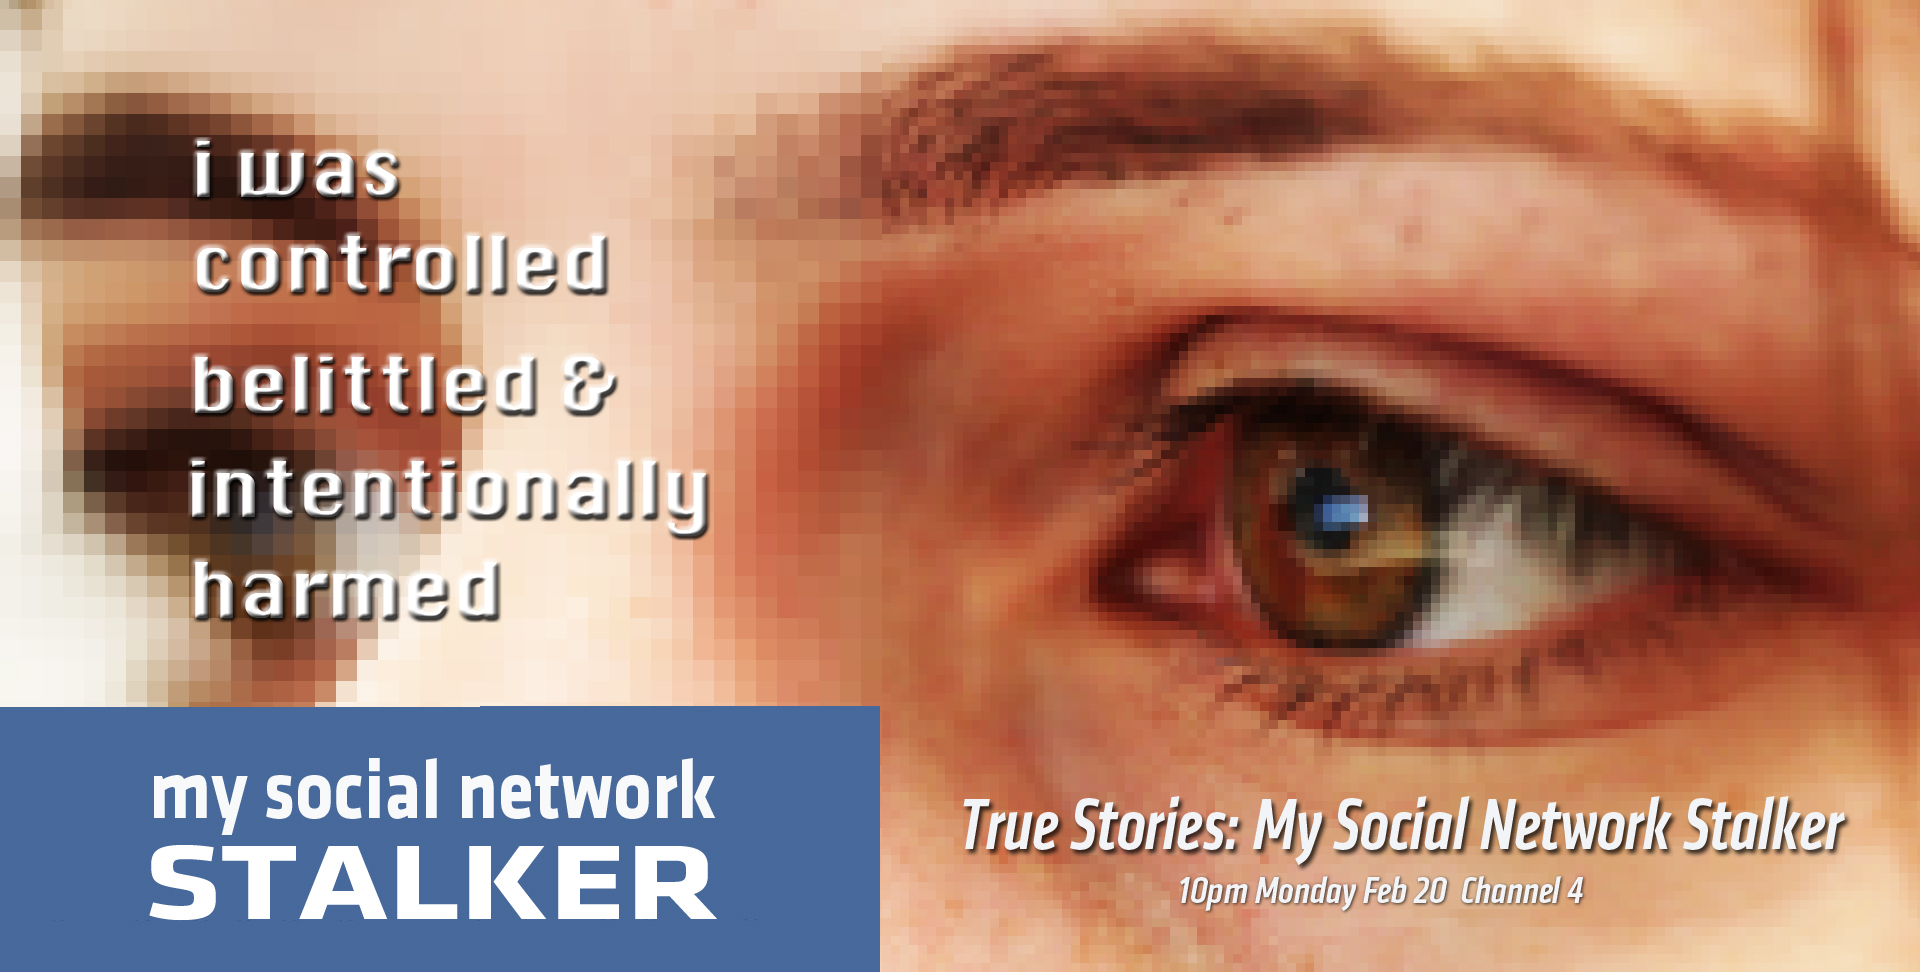 True Stories: My Social Network Stalker a film by Luke Campbell for Channel 4